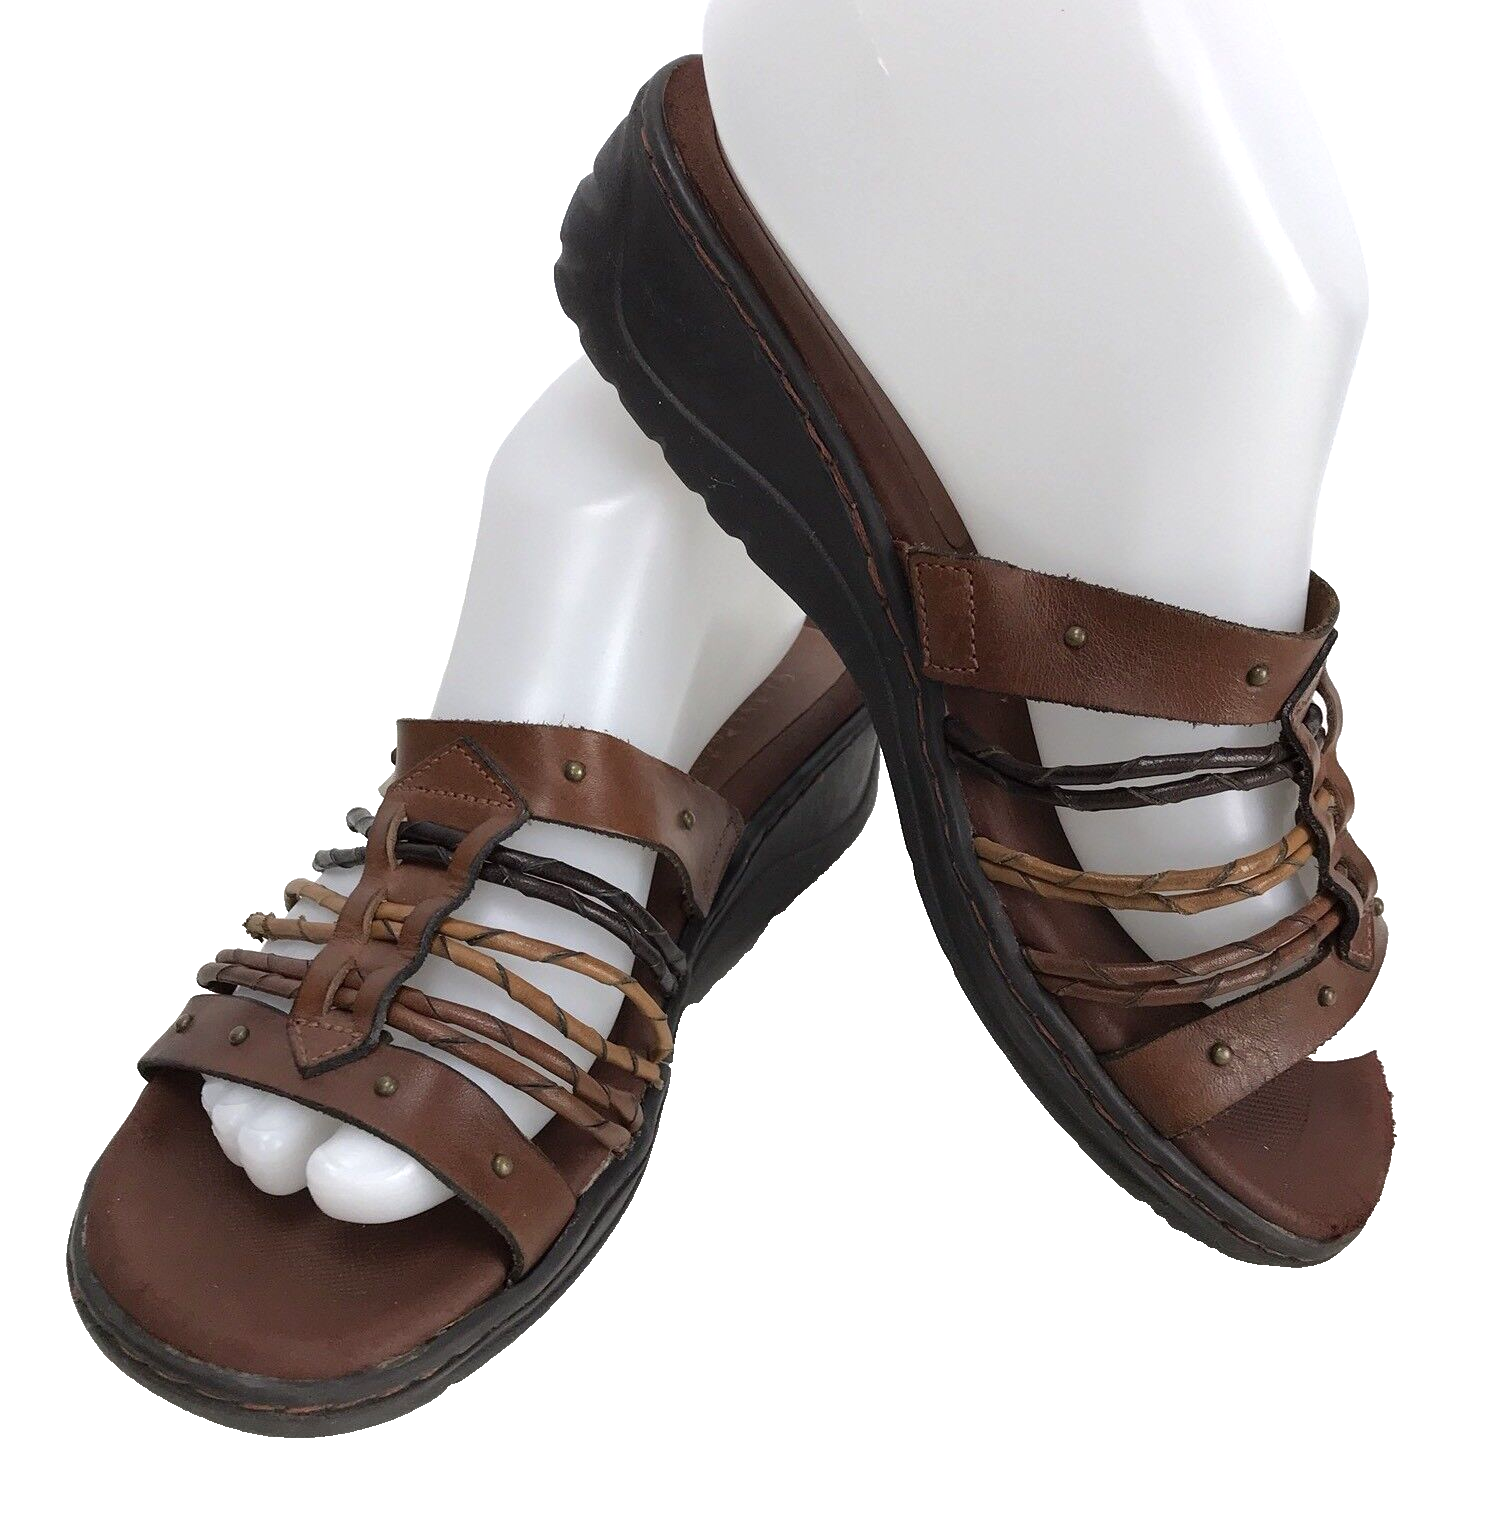 Primary image for Classic Elements Rachel Slip-on Sandals Size 7M Brown Leather Straps